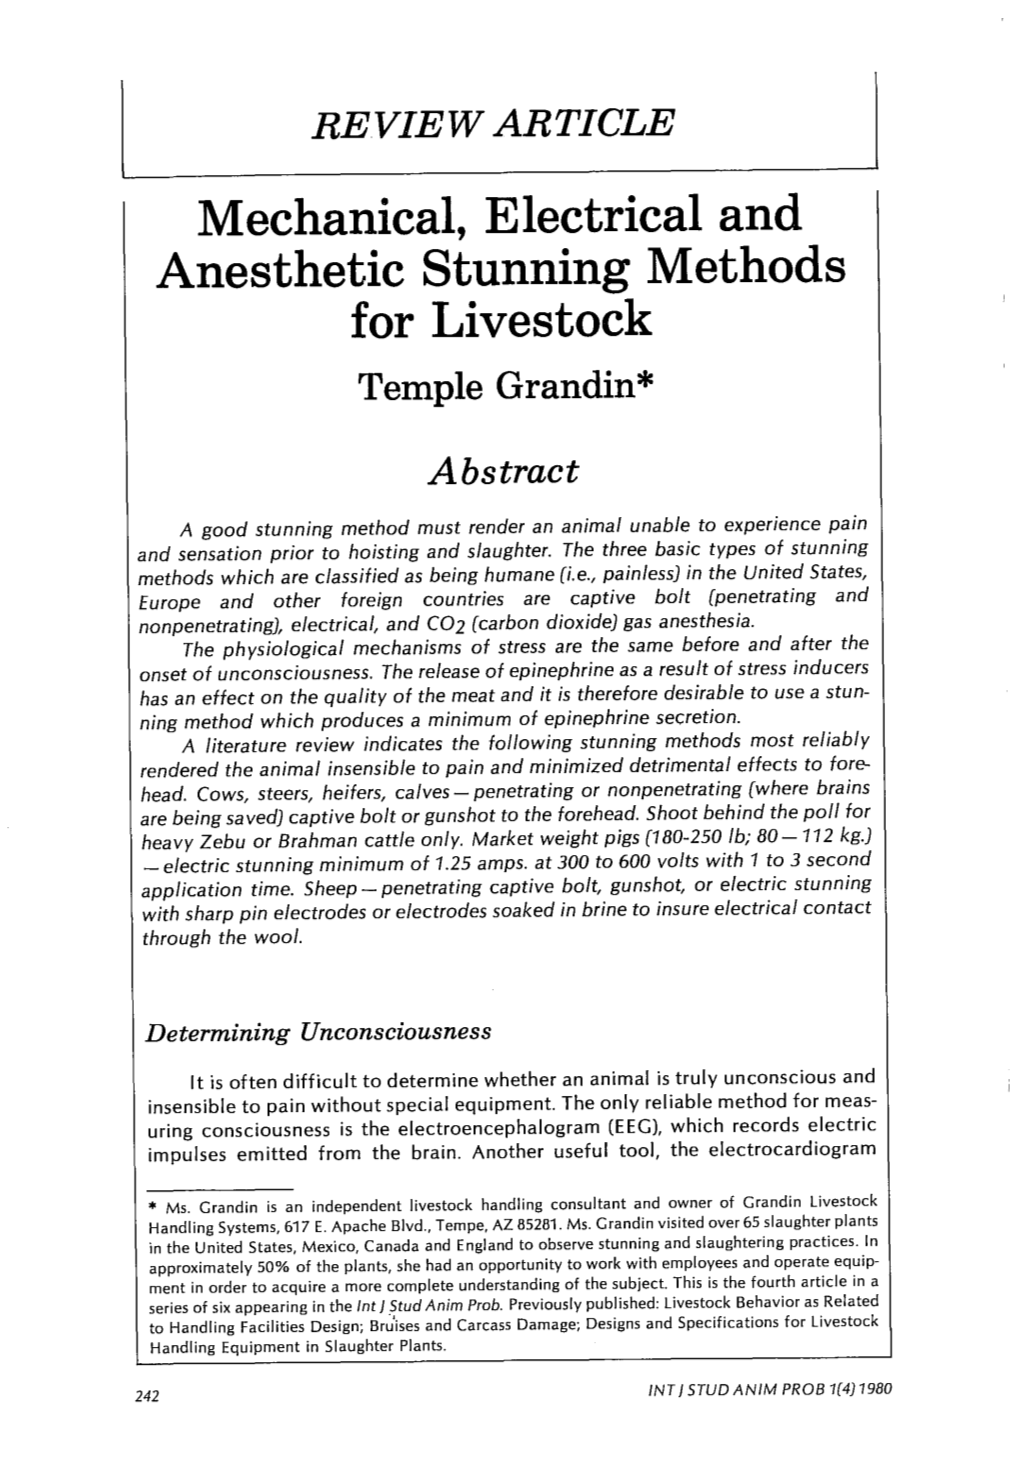 Mechanical Electrical and Anesthetic Stunning Methods for Livestock.Pdf